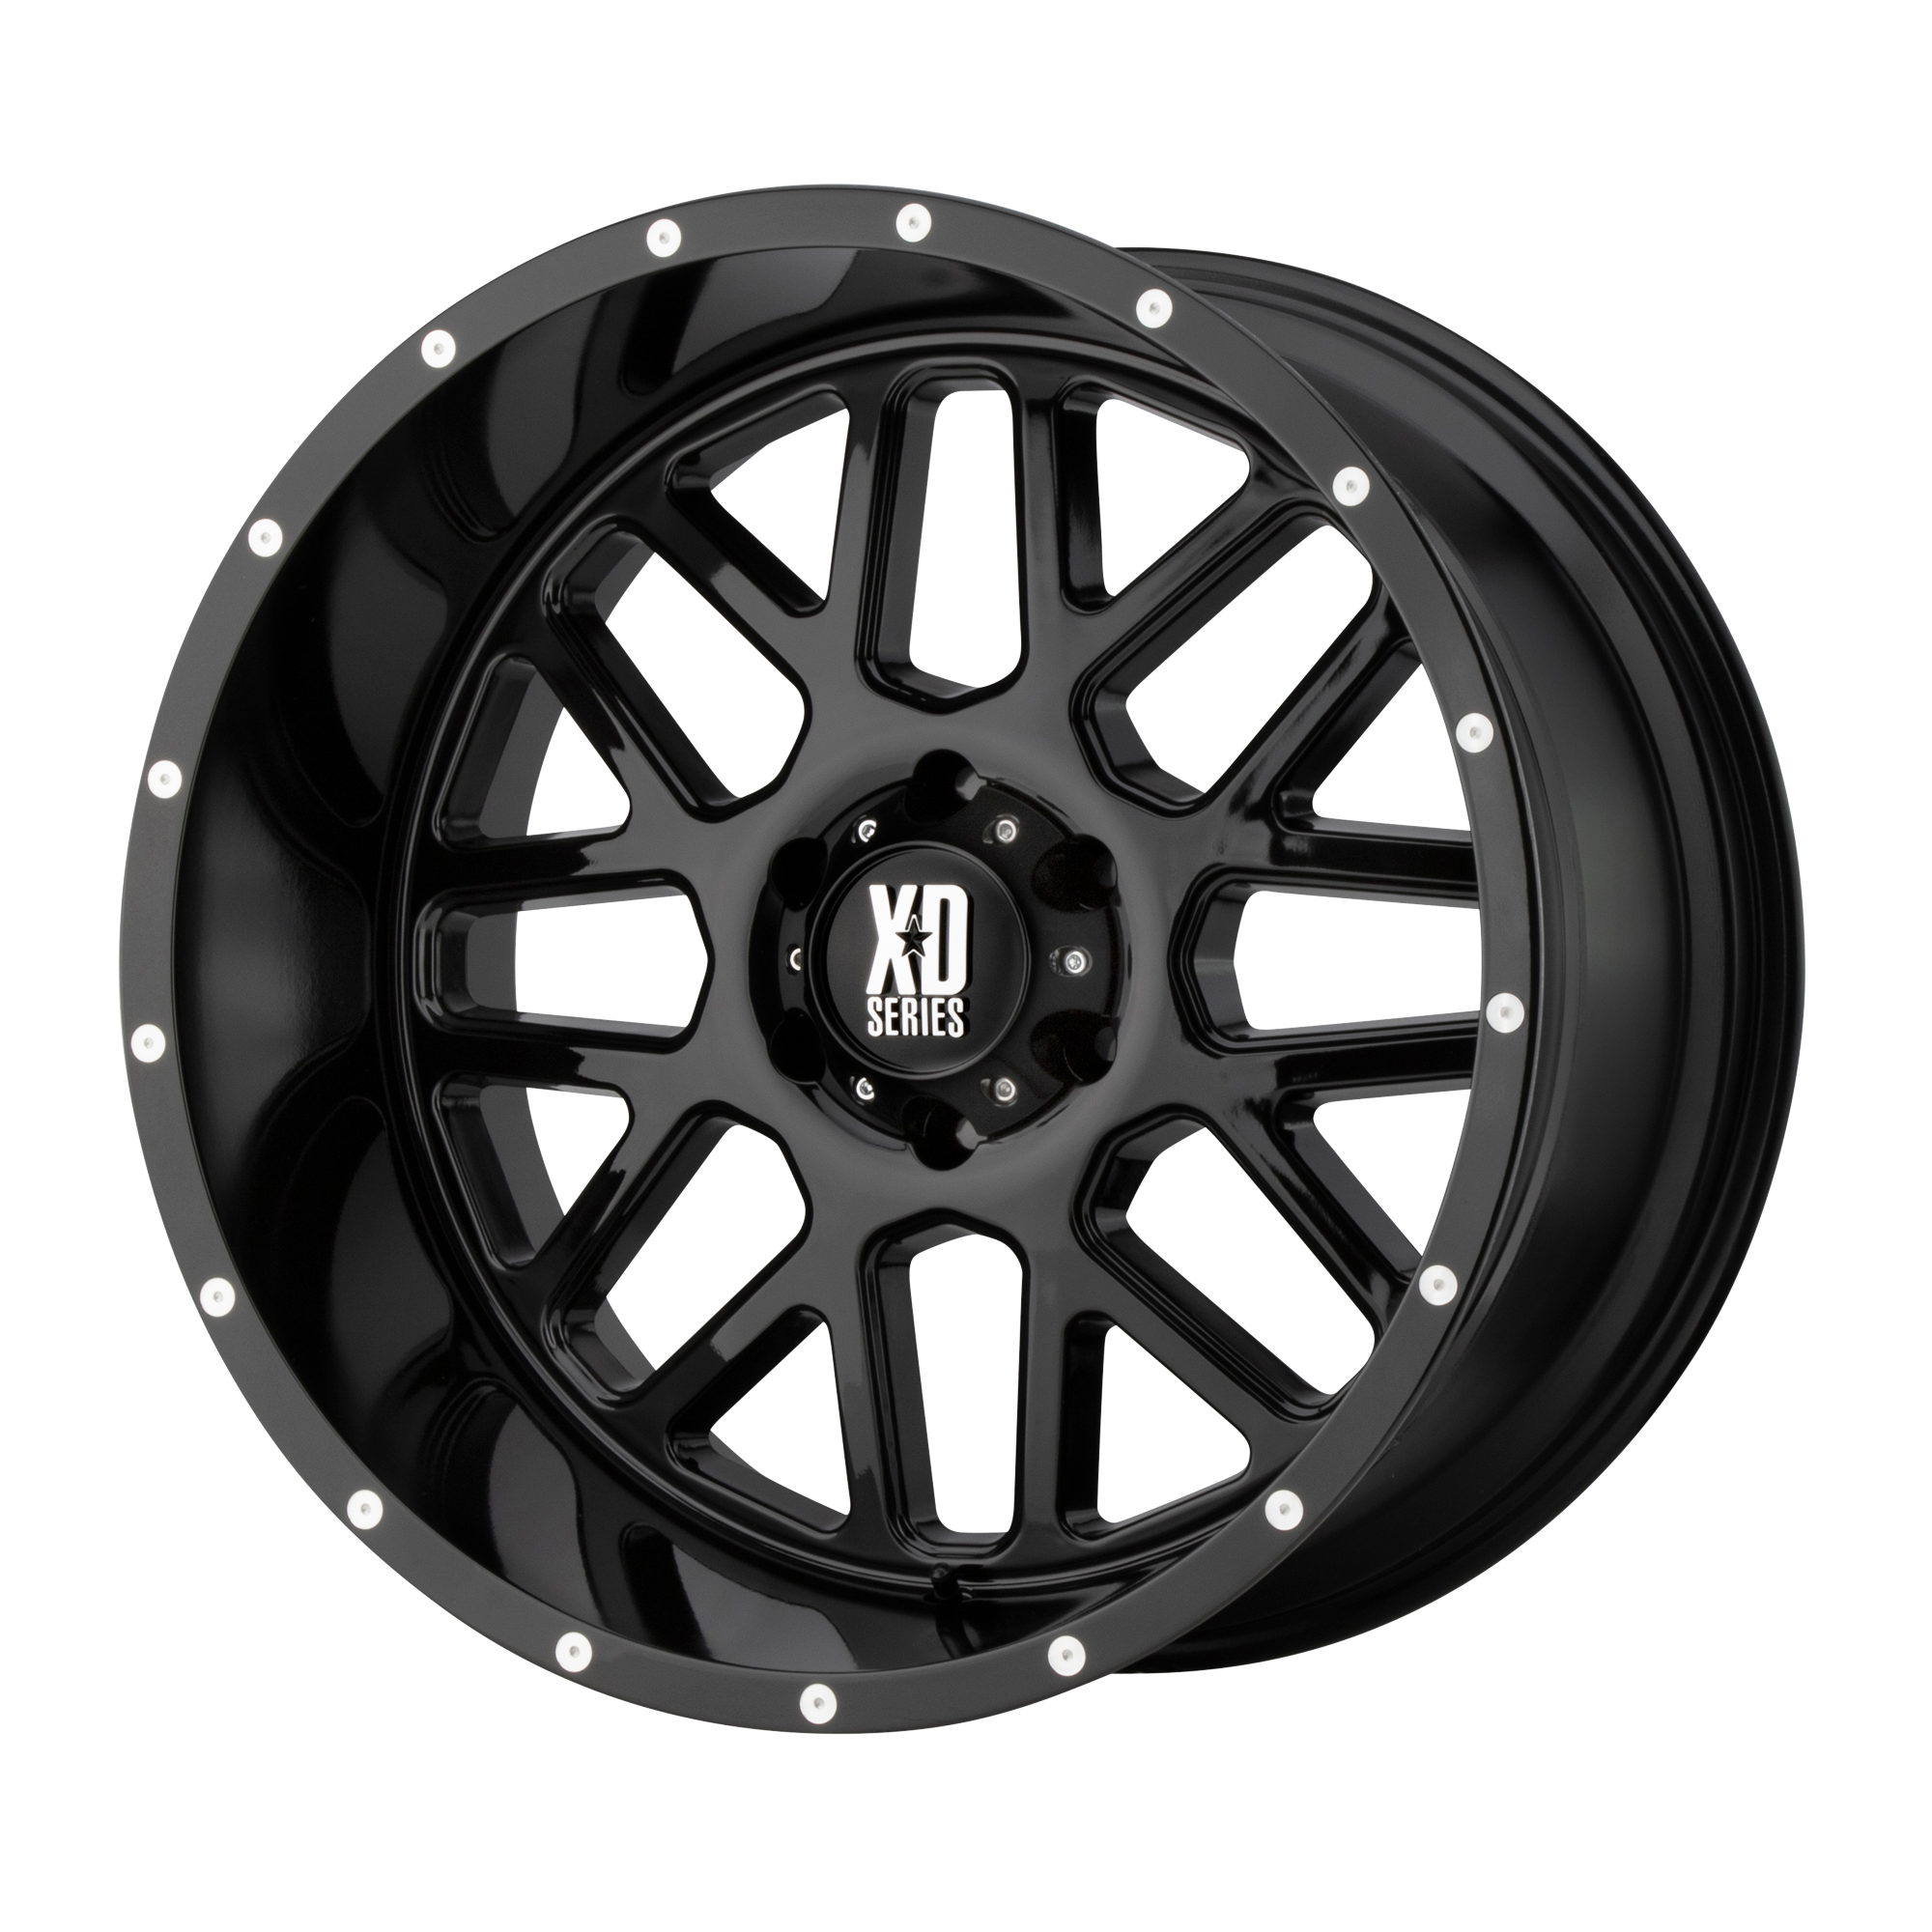 GRENADE 20x12 8x170.00 GLOSS BLACK (-44 mm) - Tires and Engine Performance